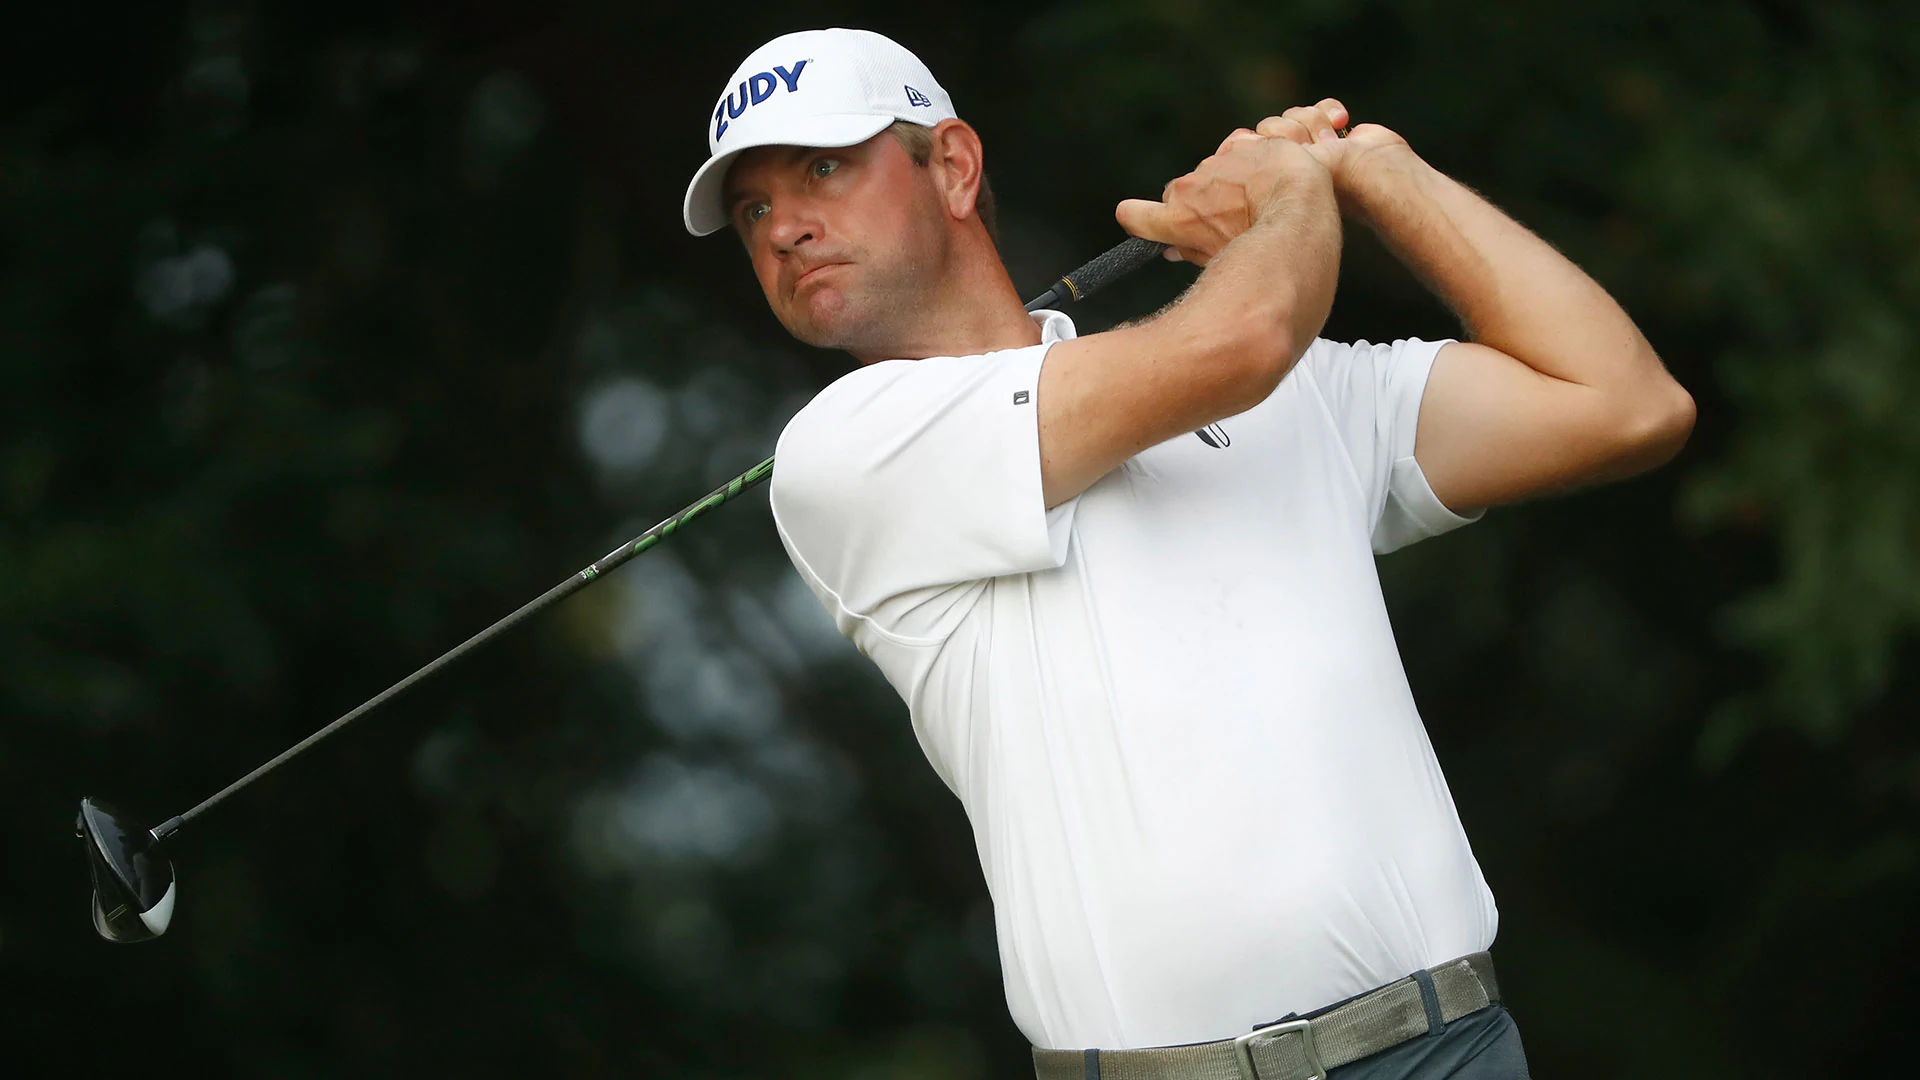 Glover slips, injures knee on 18th at Northern Trust